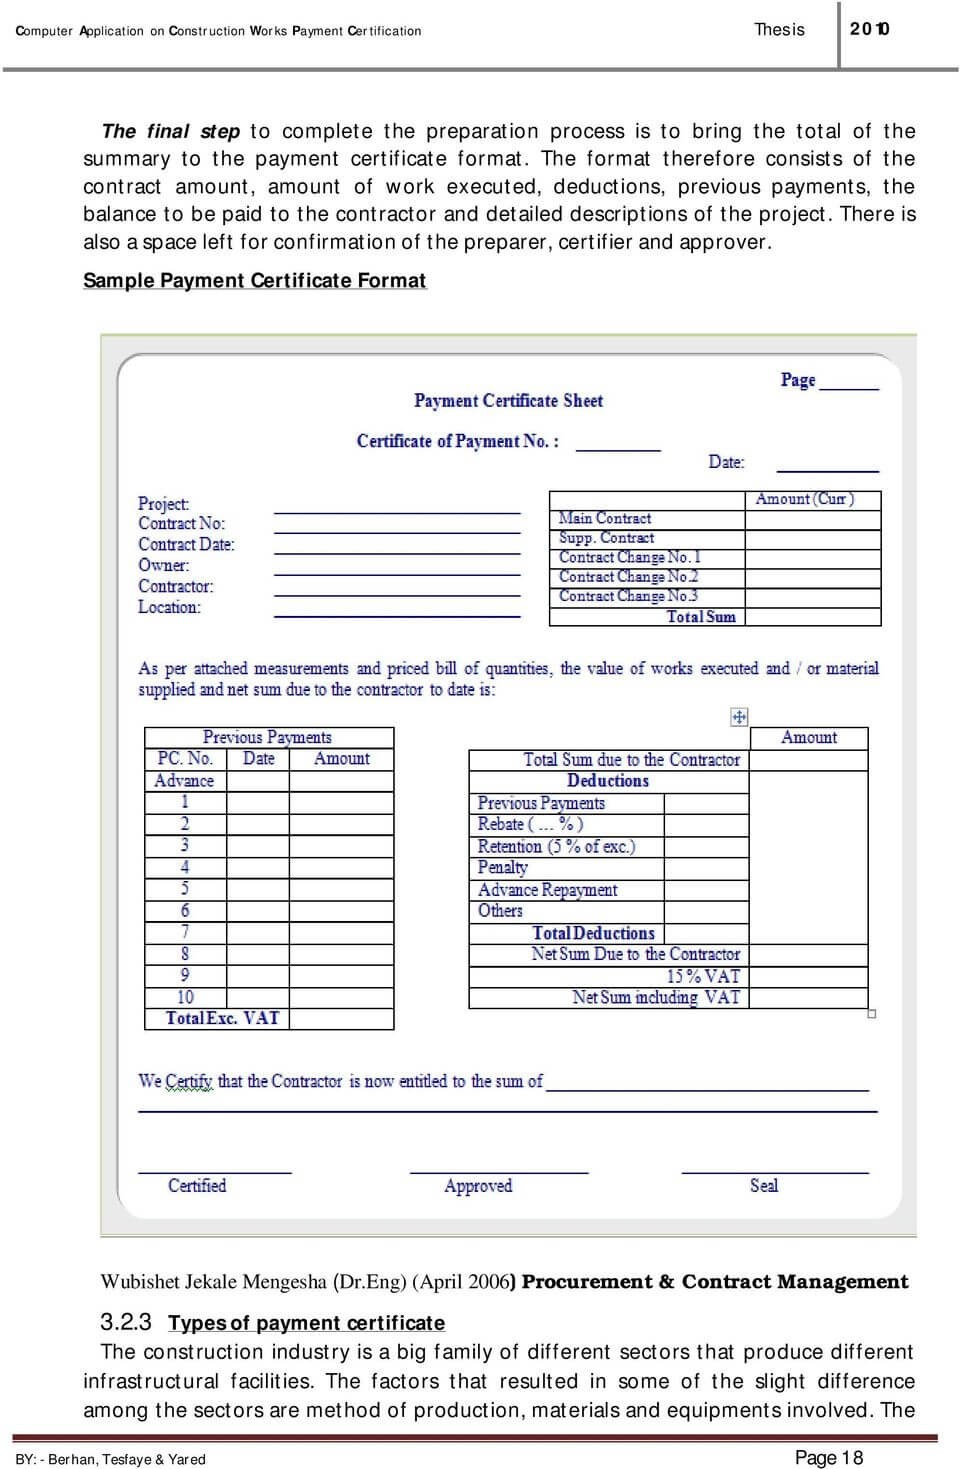 Computer Application On Construction Works Payment Regarding Construction Payment Certificate Template